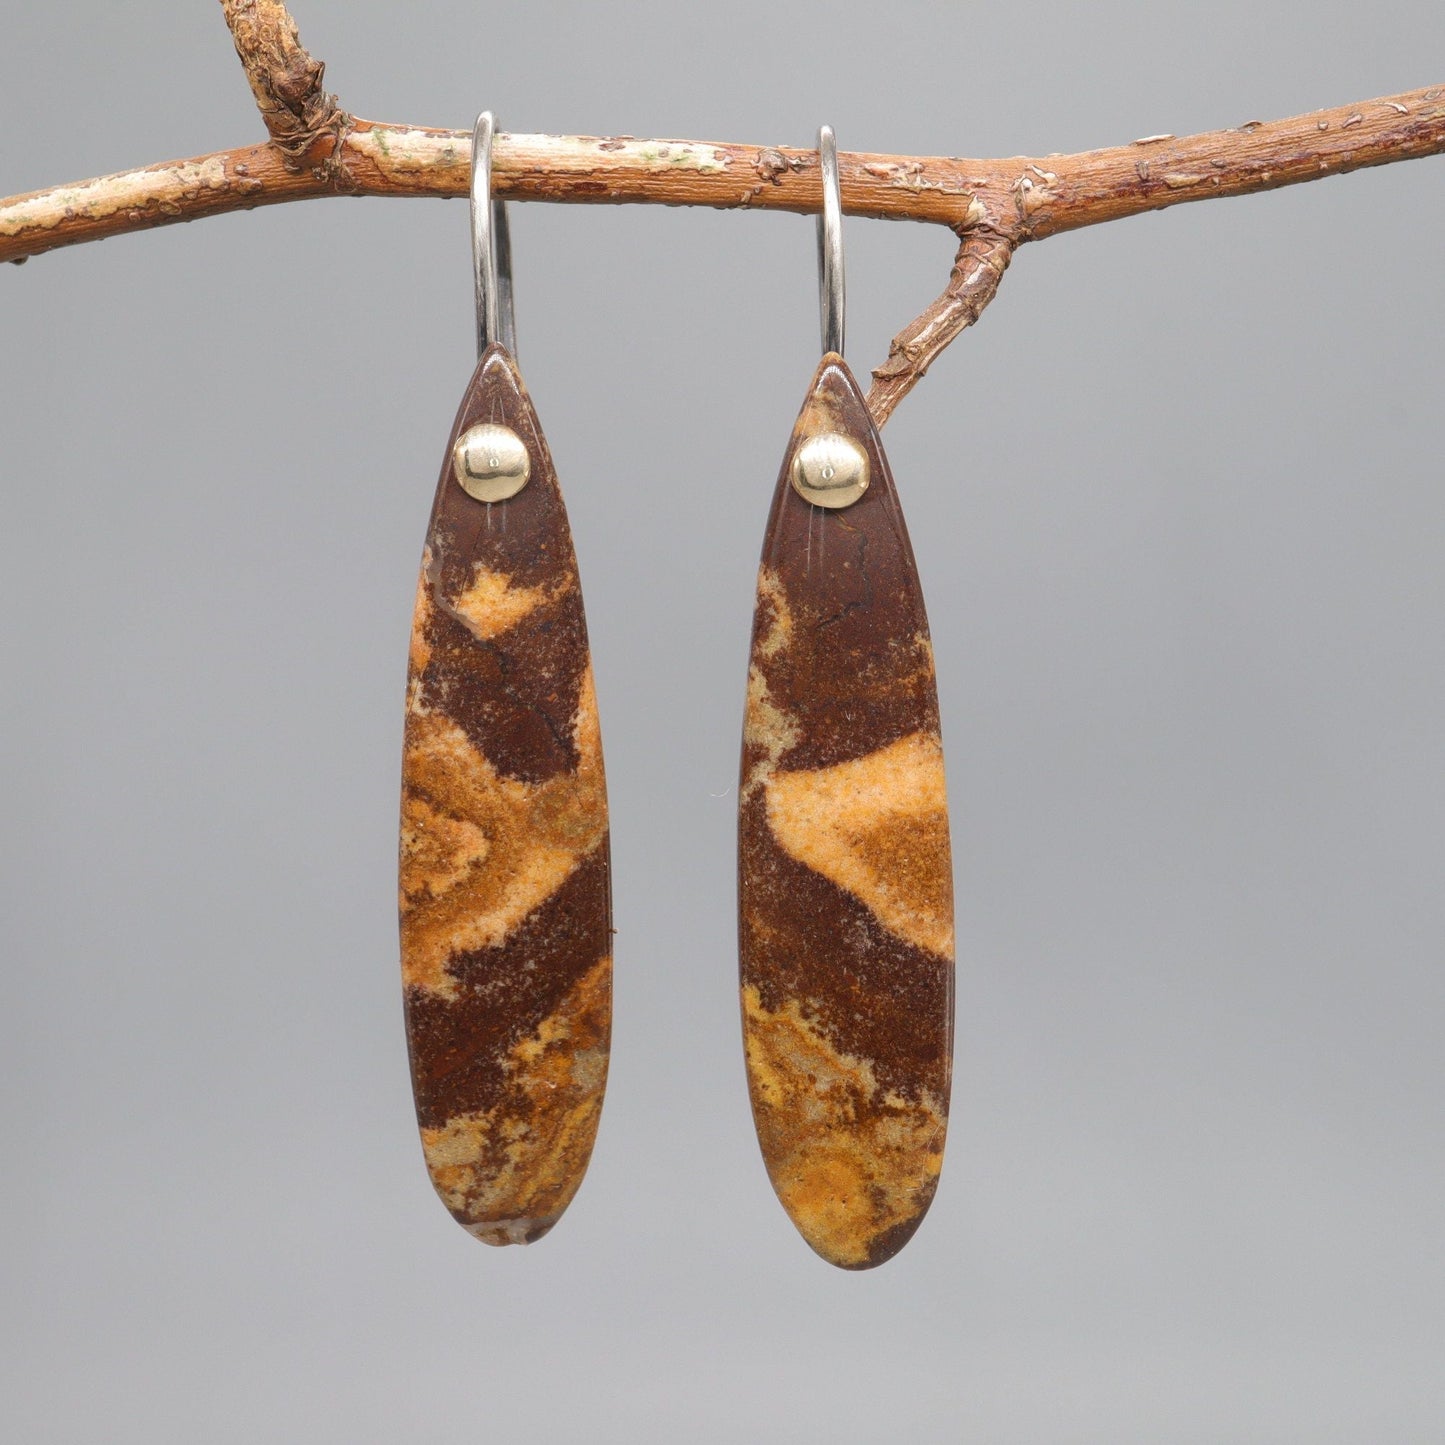 Drop earrings, Australian Outback Jasper gemstones with antique dark silver and gold fittings - Gretna Green Wedding Rings